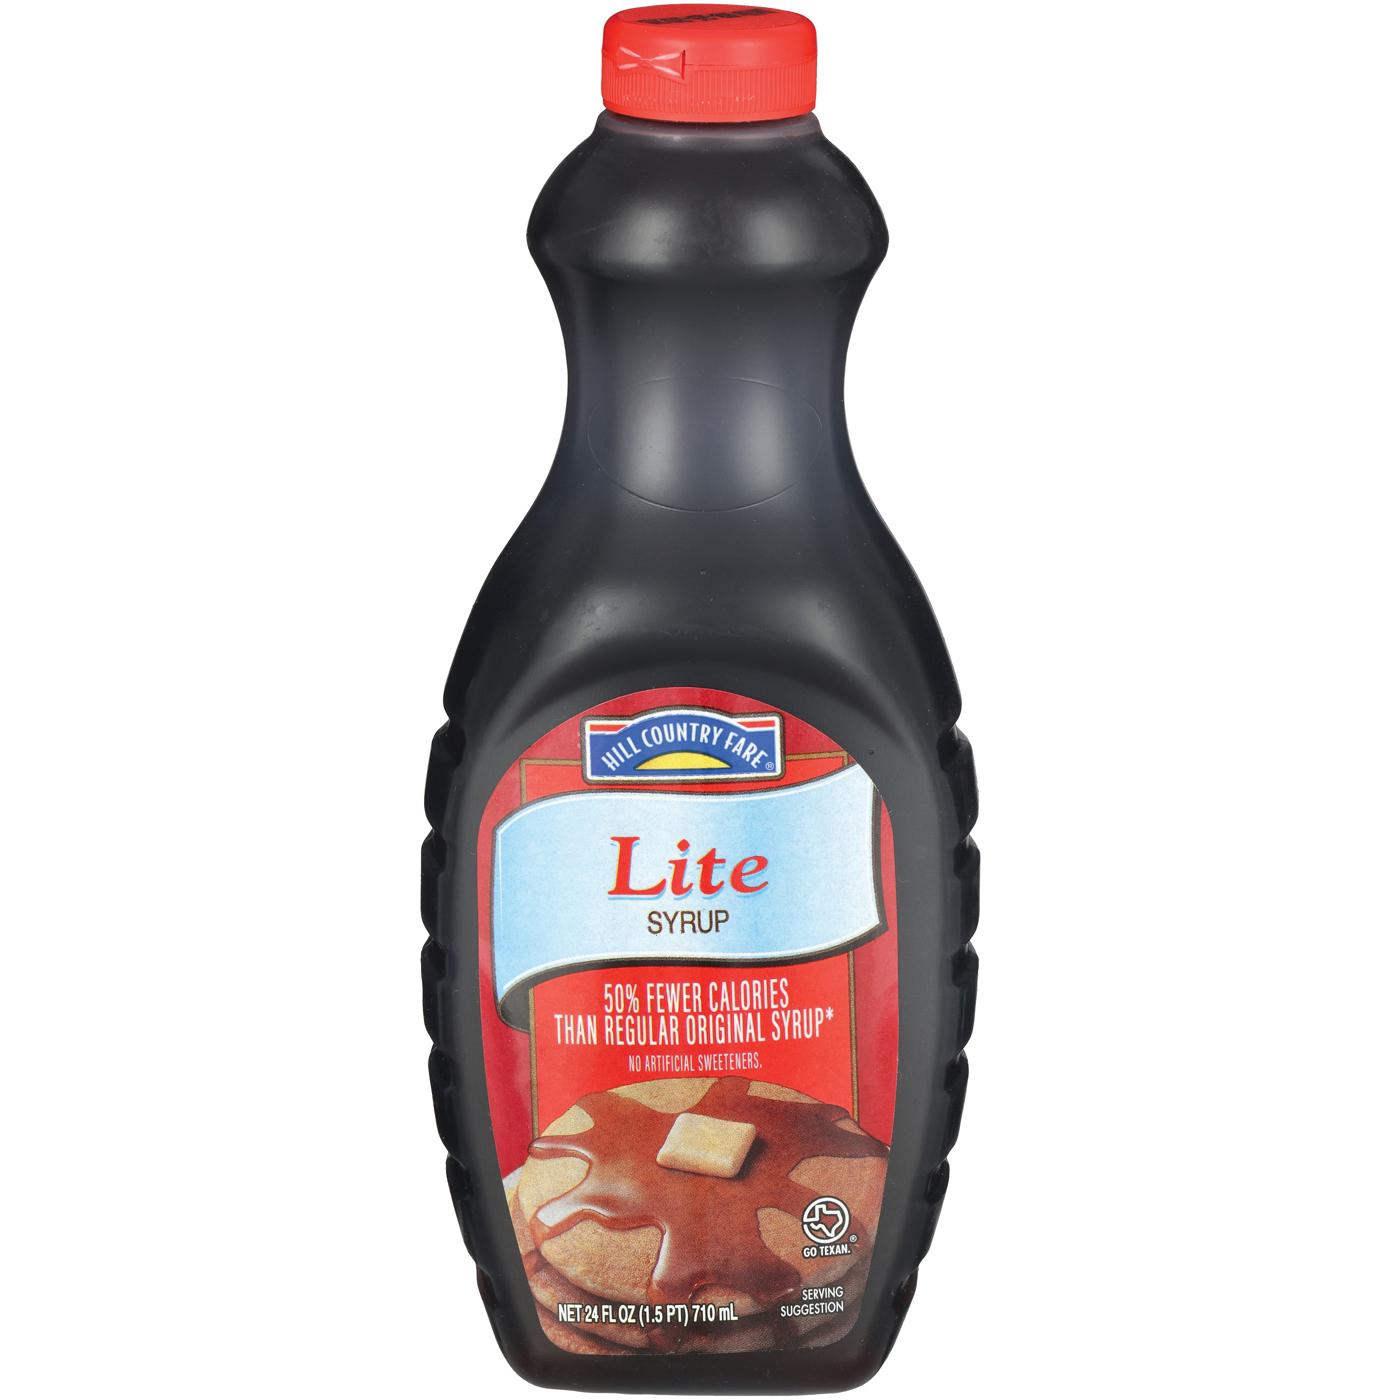 Hill Country Fare Lite Syrup; image 2 of 2